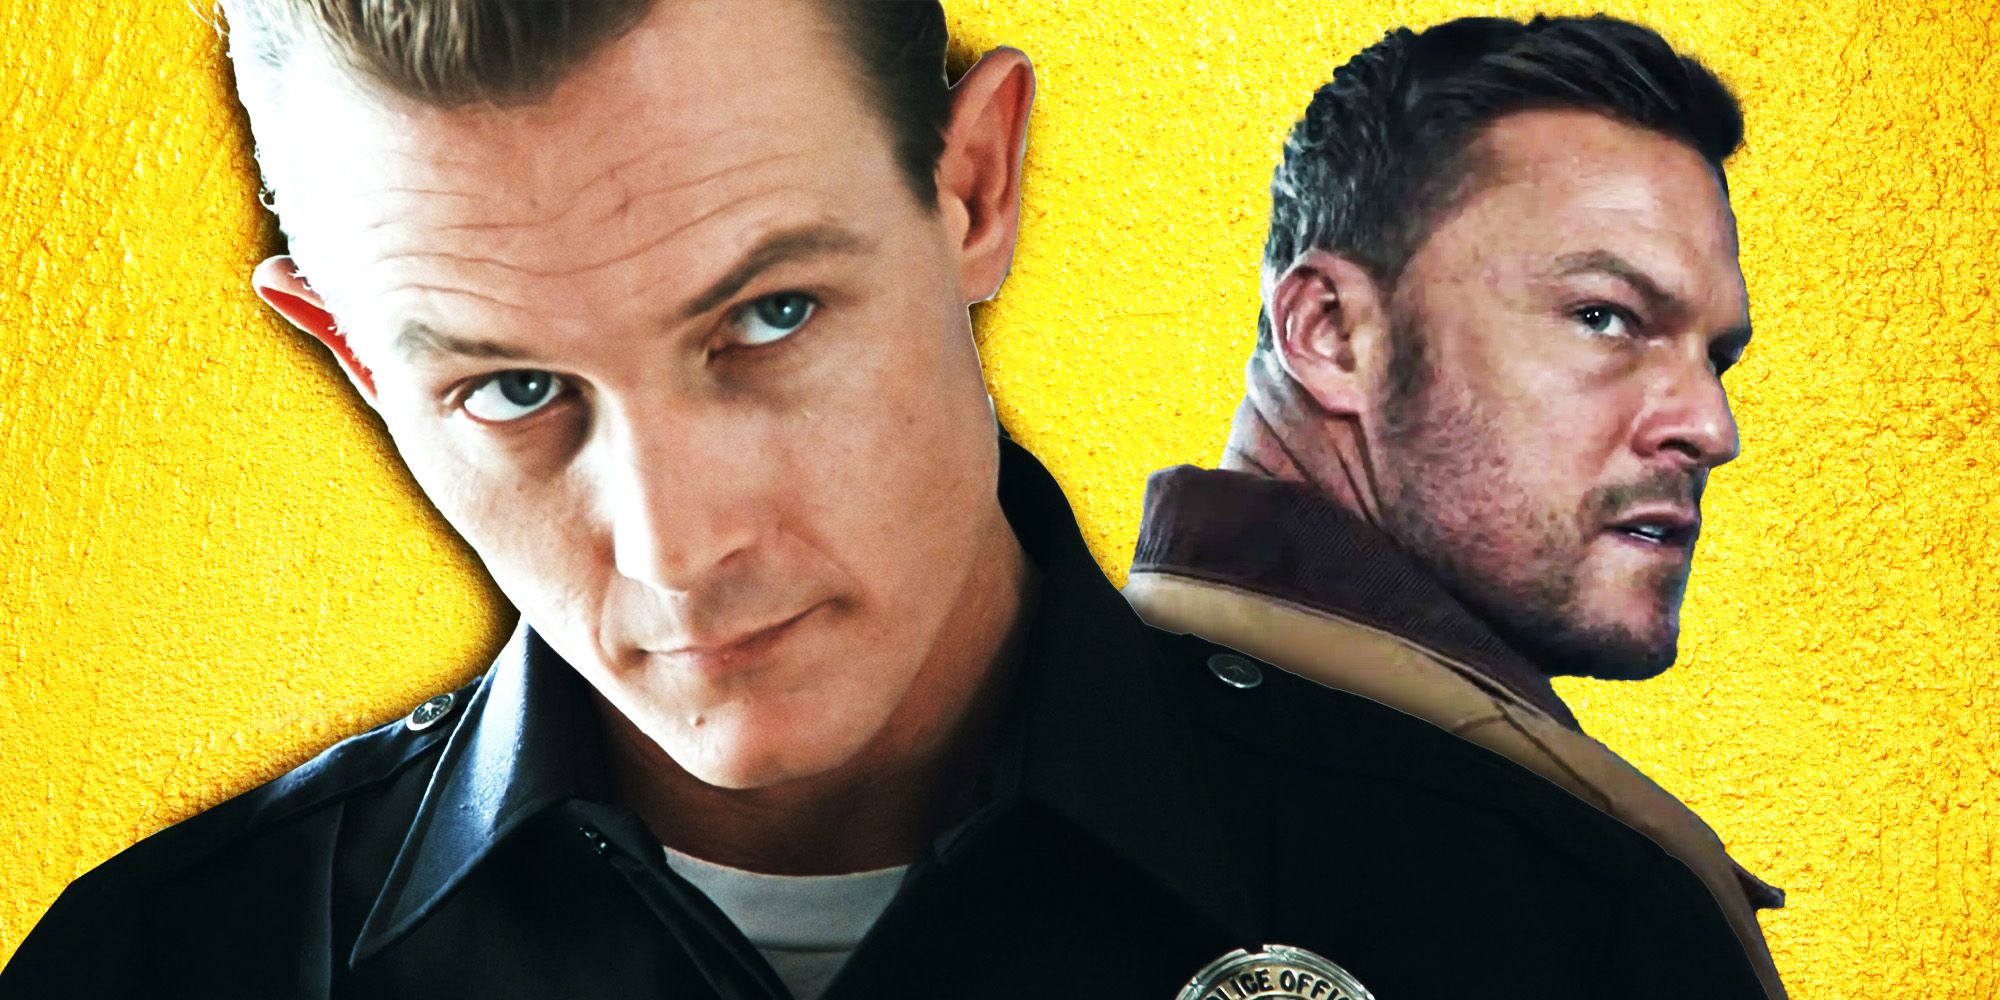 Alan Ritchson as Reacher and Robert Patrick as T1000 in Terminator 2